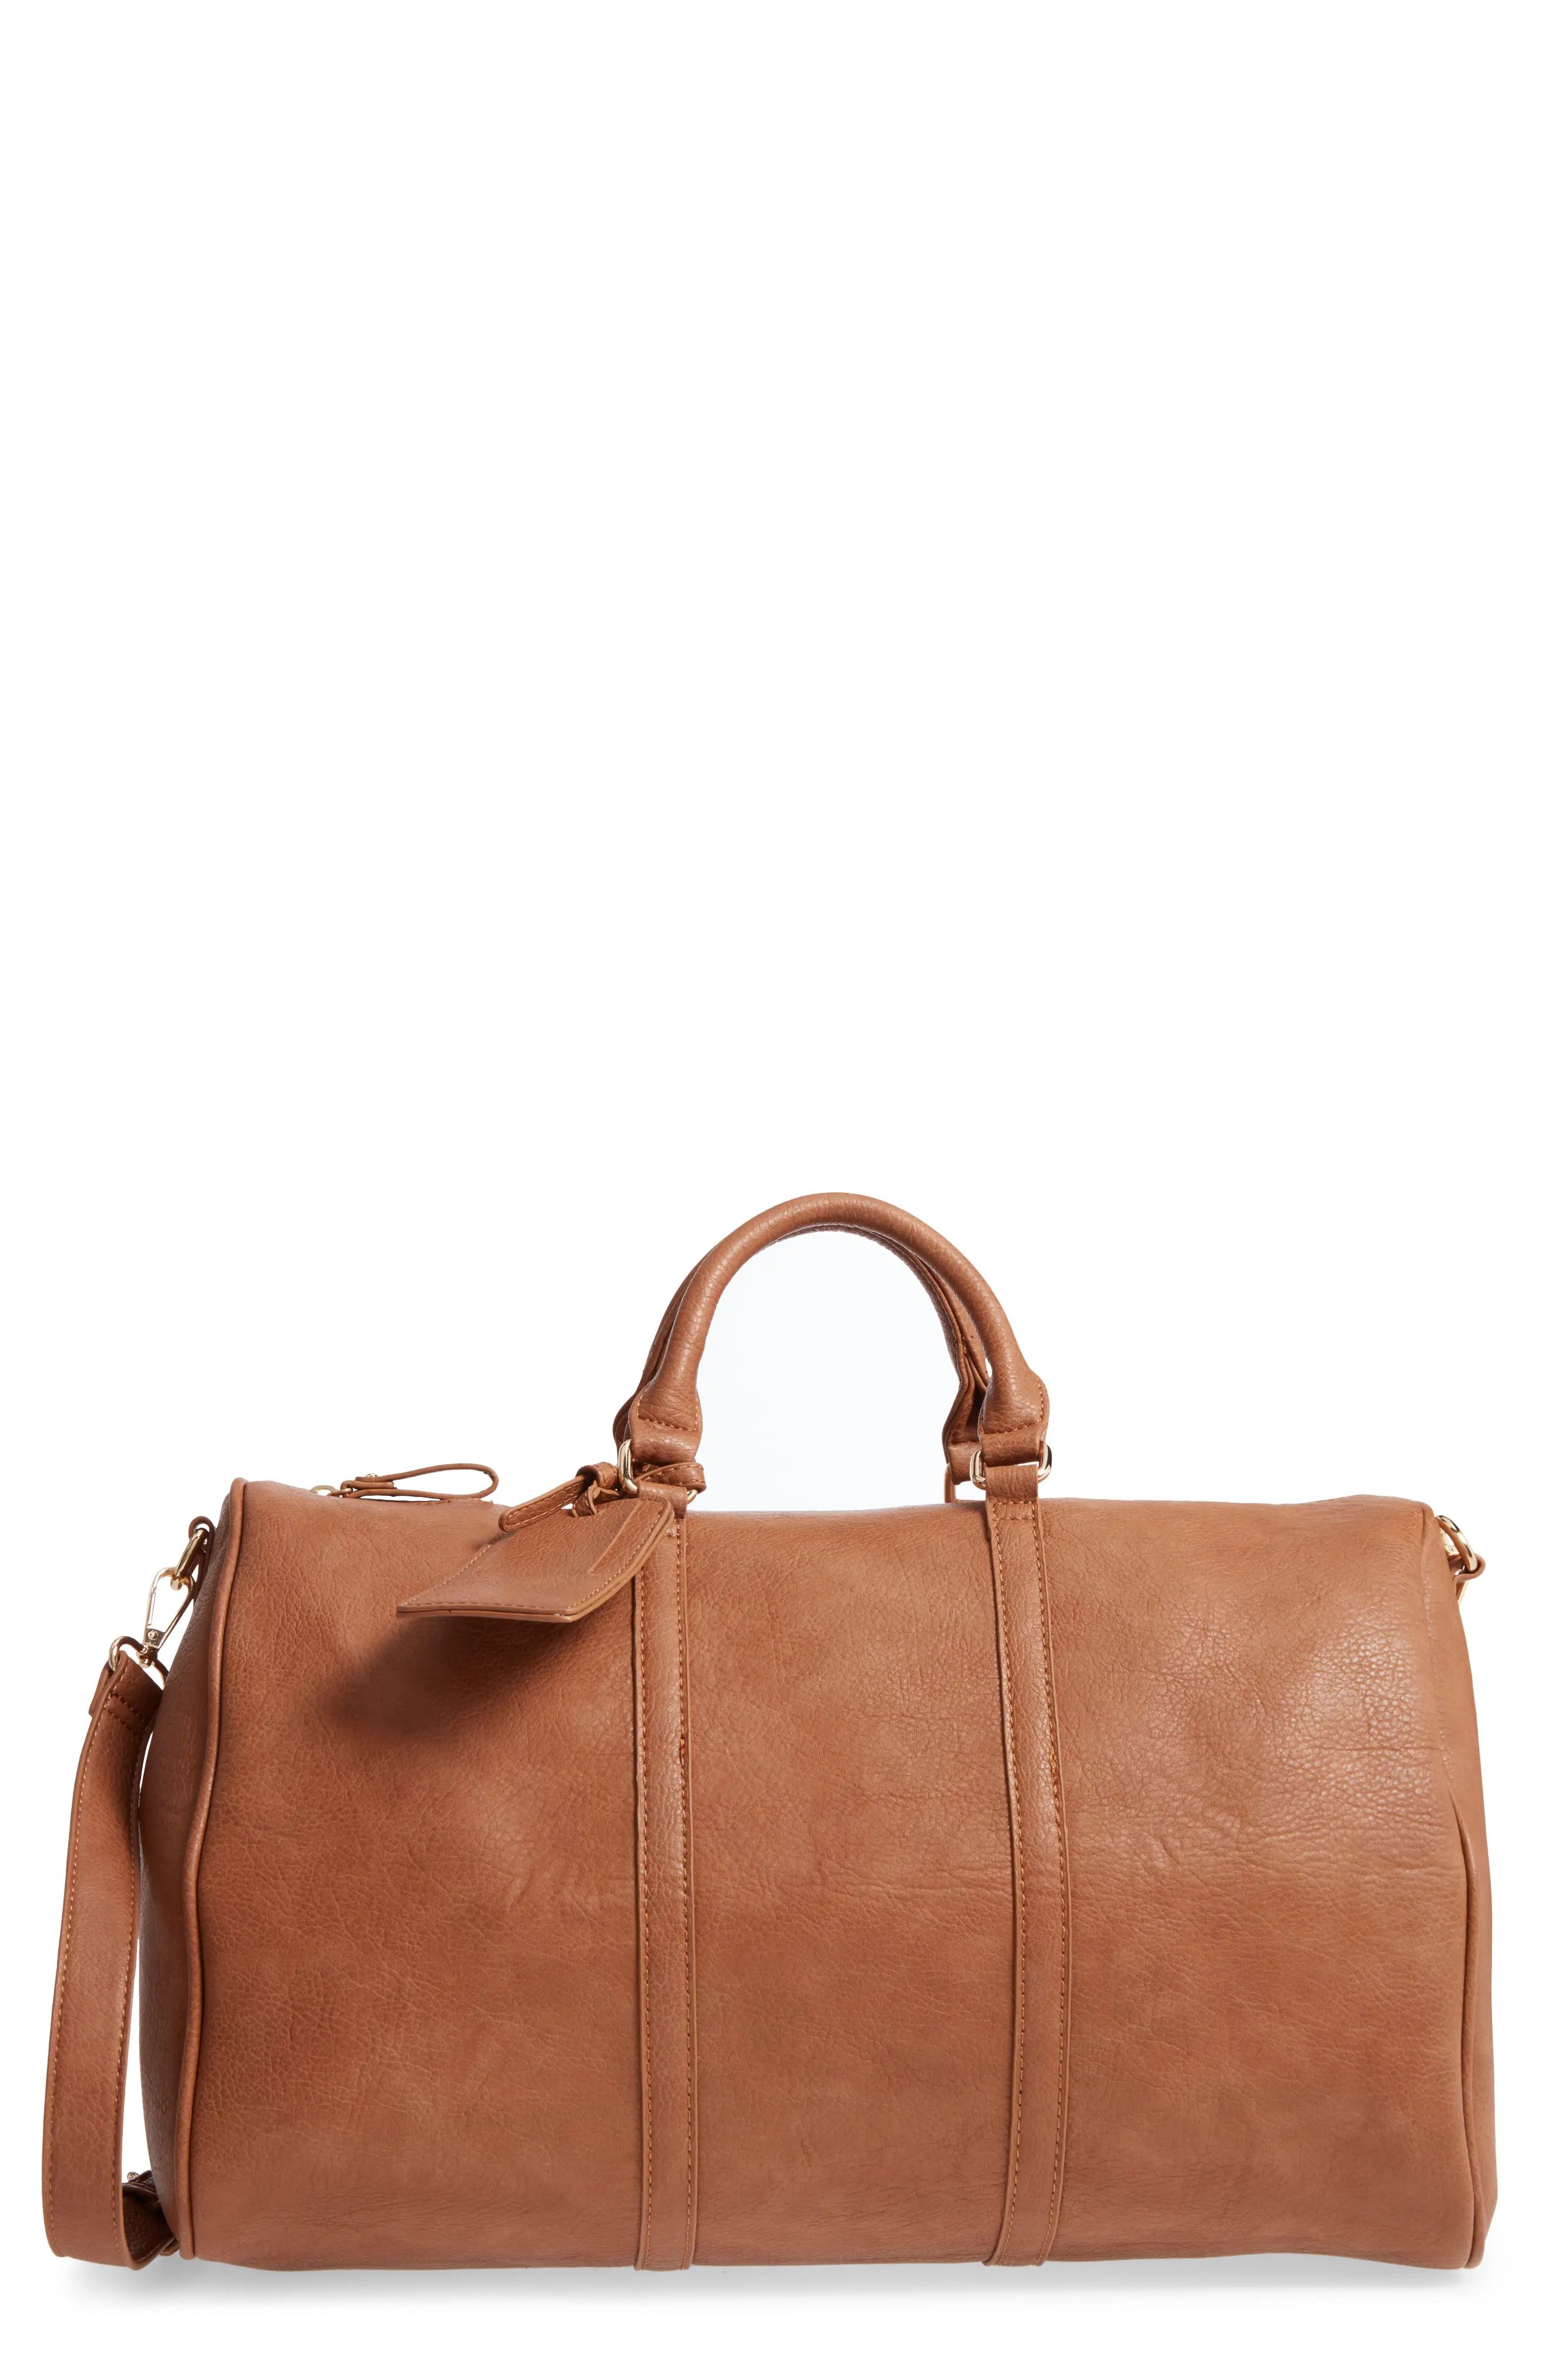 Sole Society 'Cassidy' Faux Leather Duffel Bag | Nordstrom